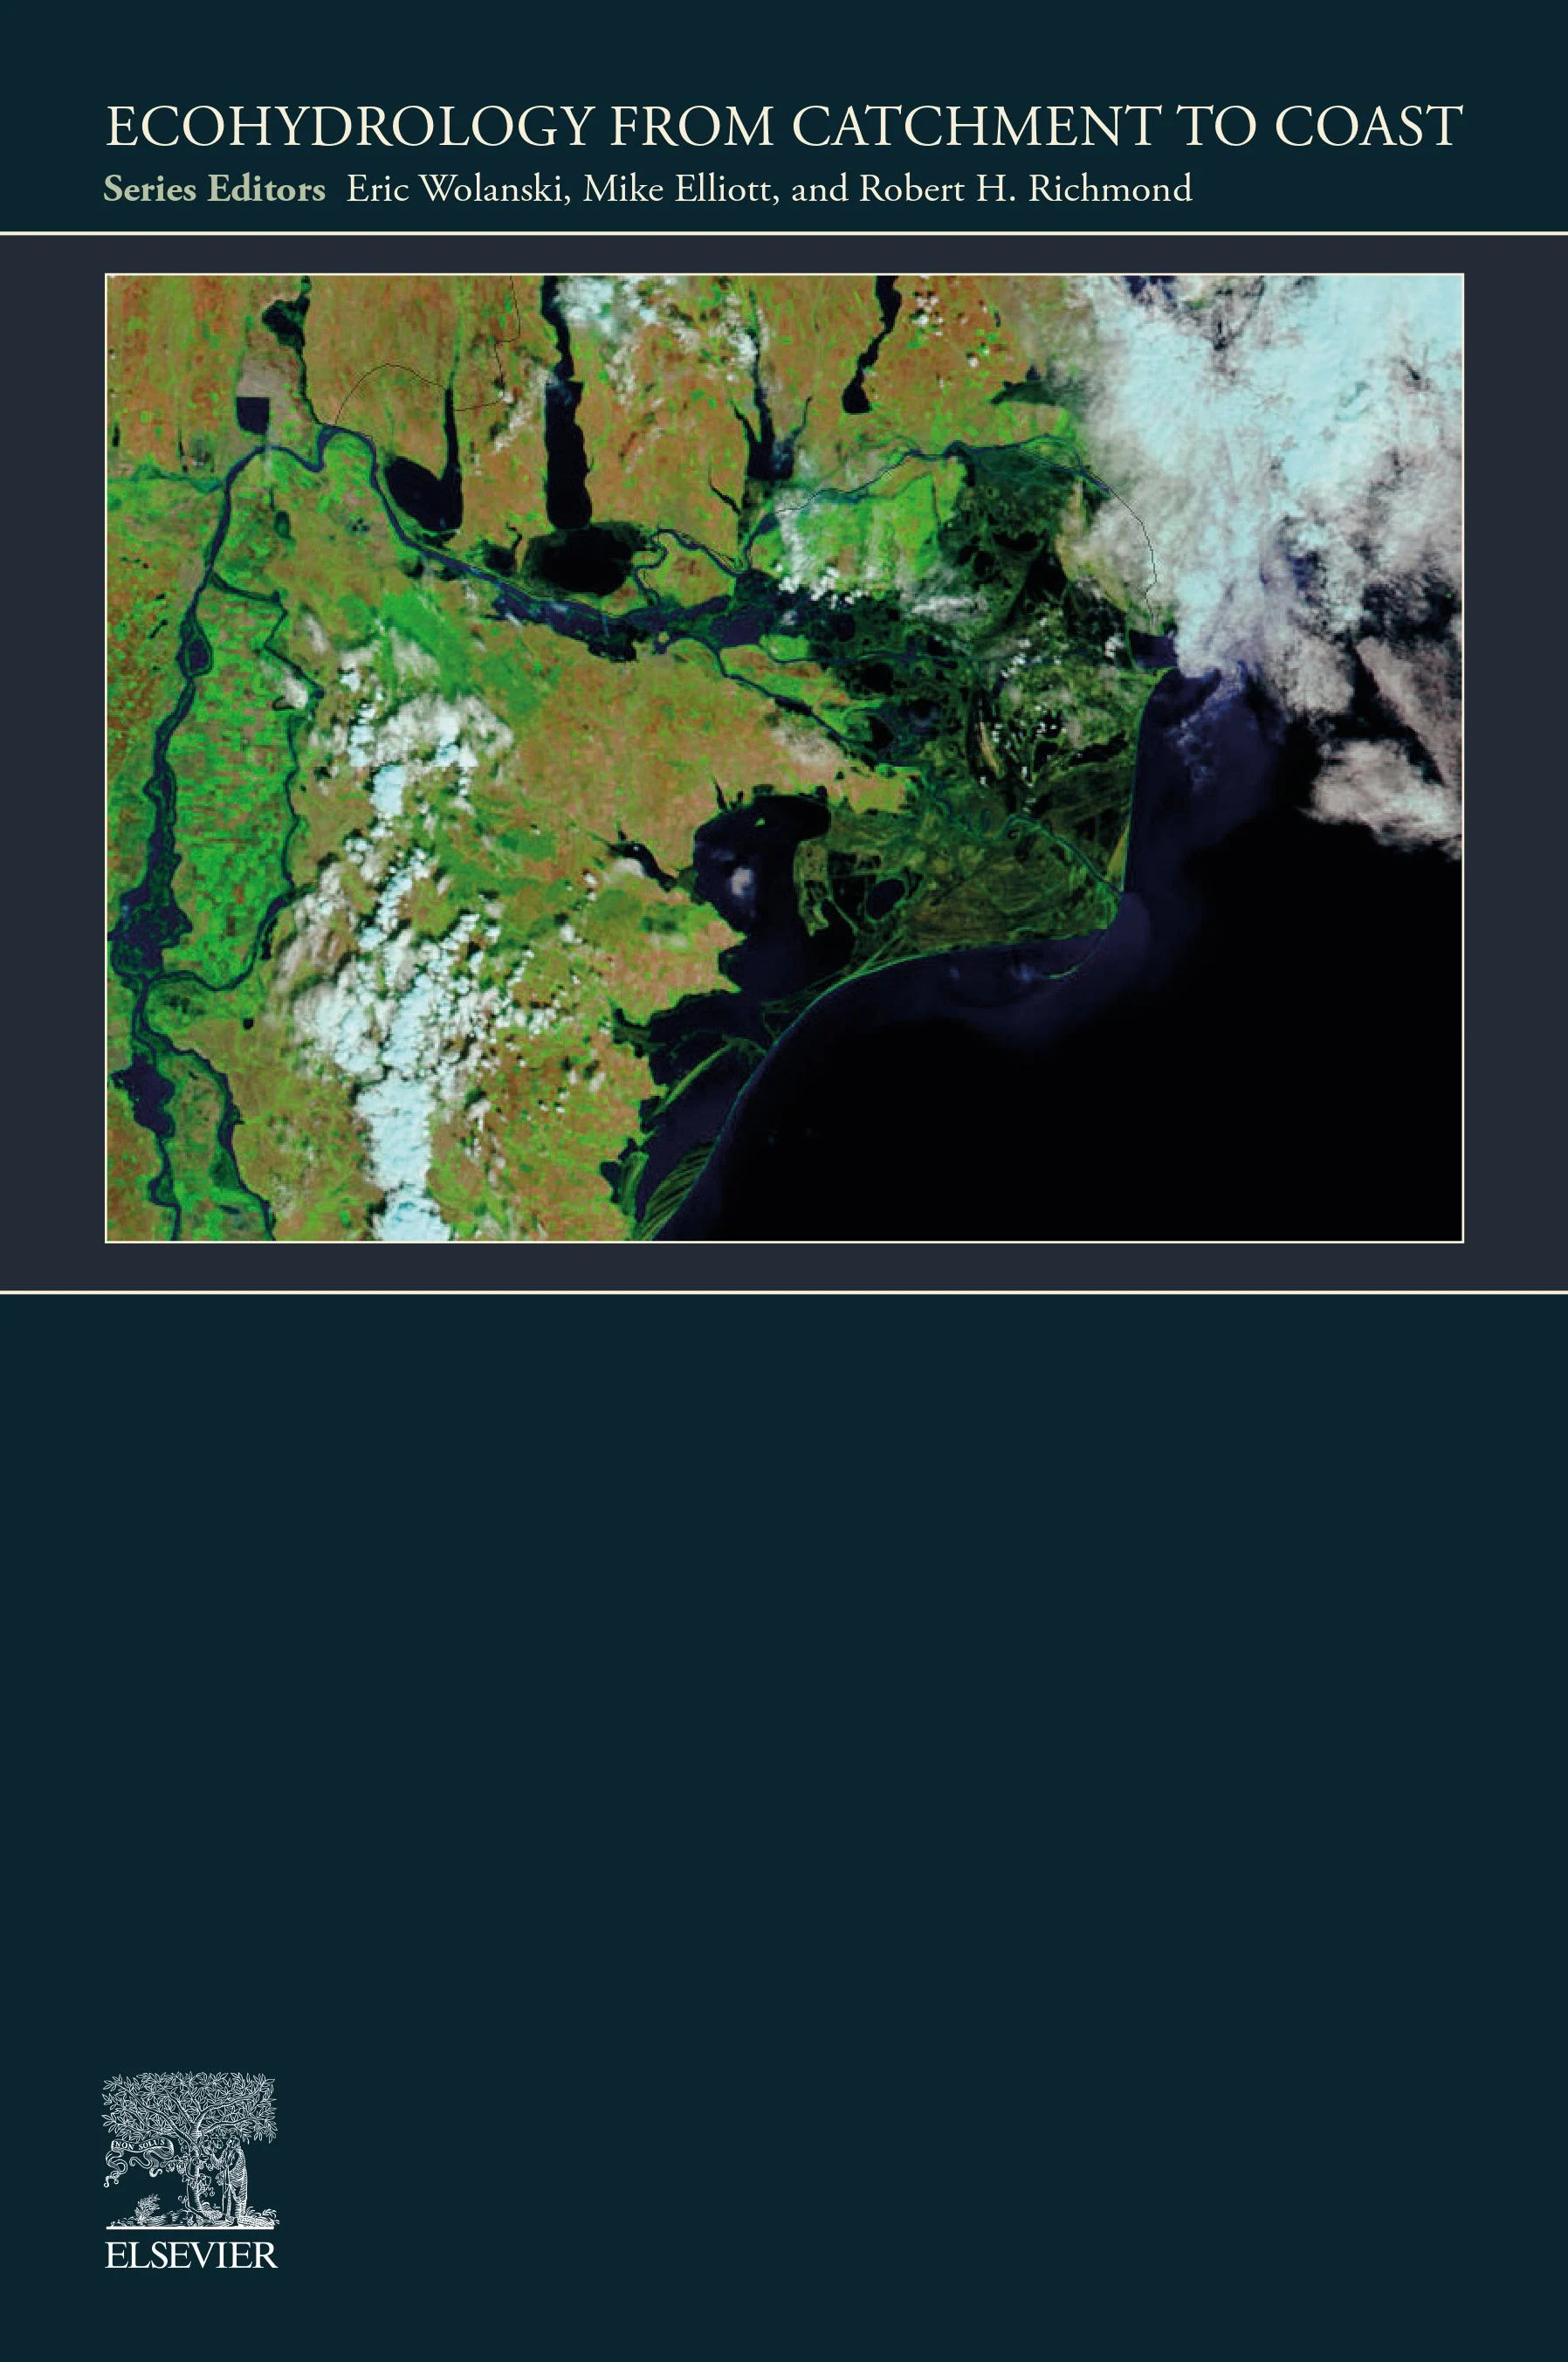 Sample cover of Ecohydrology from Catchment to Coast